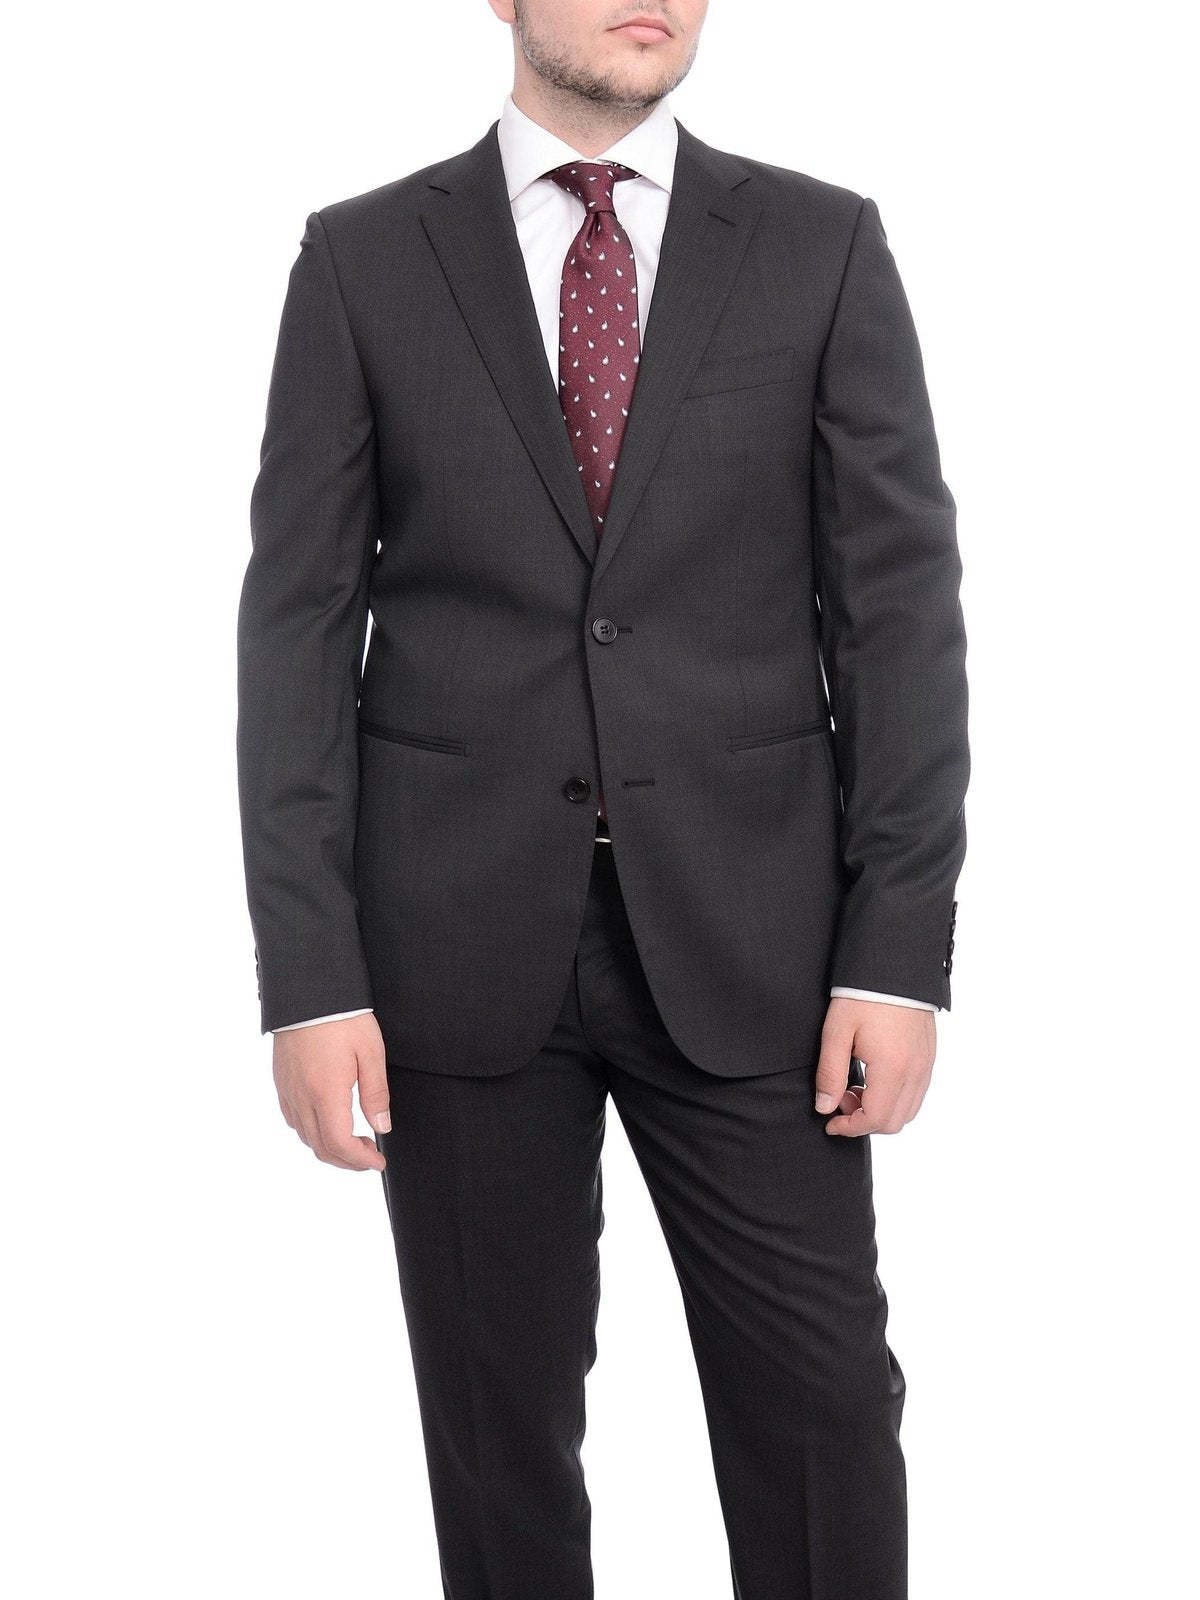 Napoli TWO PIECE SUITS Napoli Slim Fit Solid Charcoal Gray Two Button Half Canvassed Marzotto Wool Suit